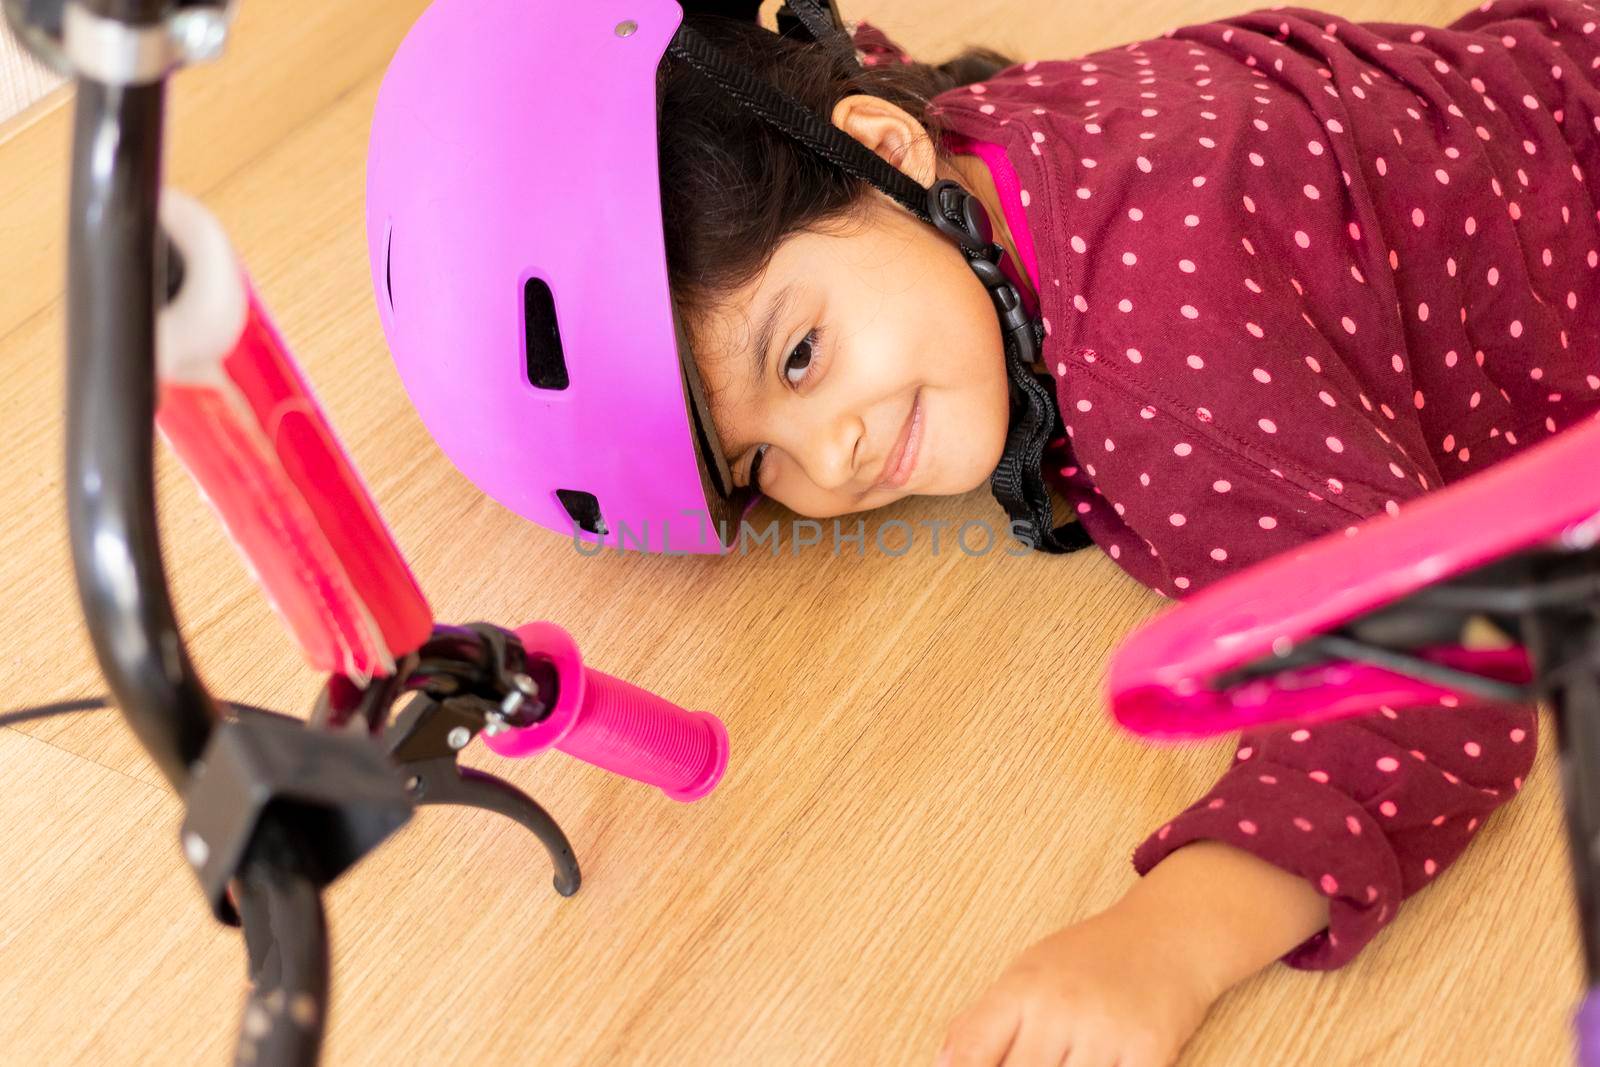 Sad little girl fell to the ground while playing with her bicycl by eagg13